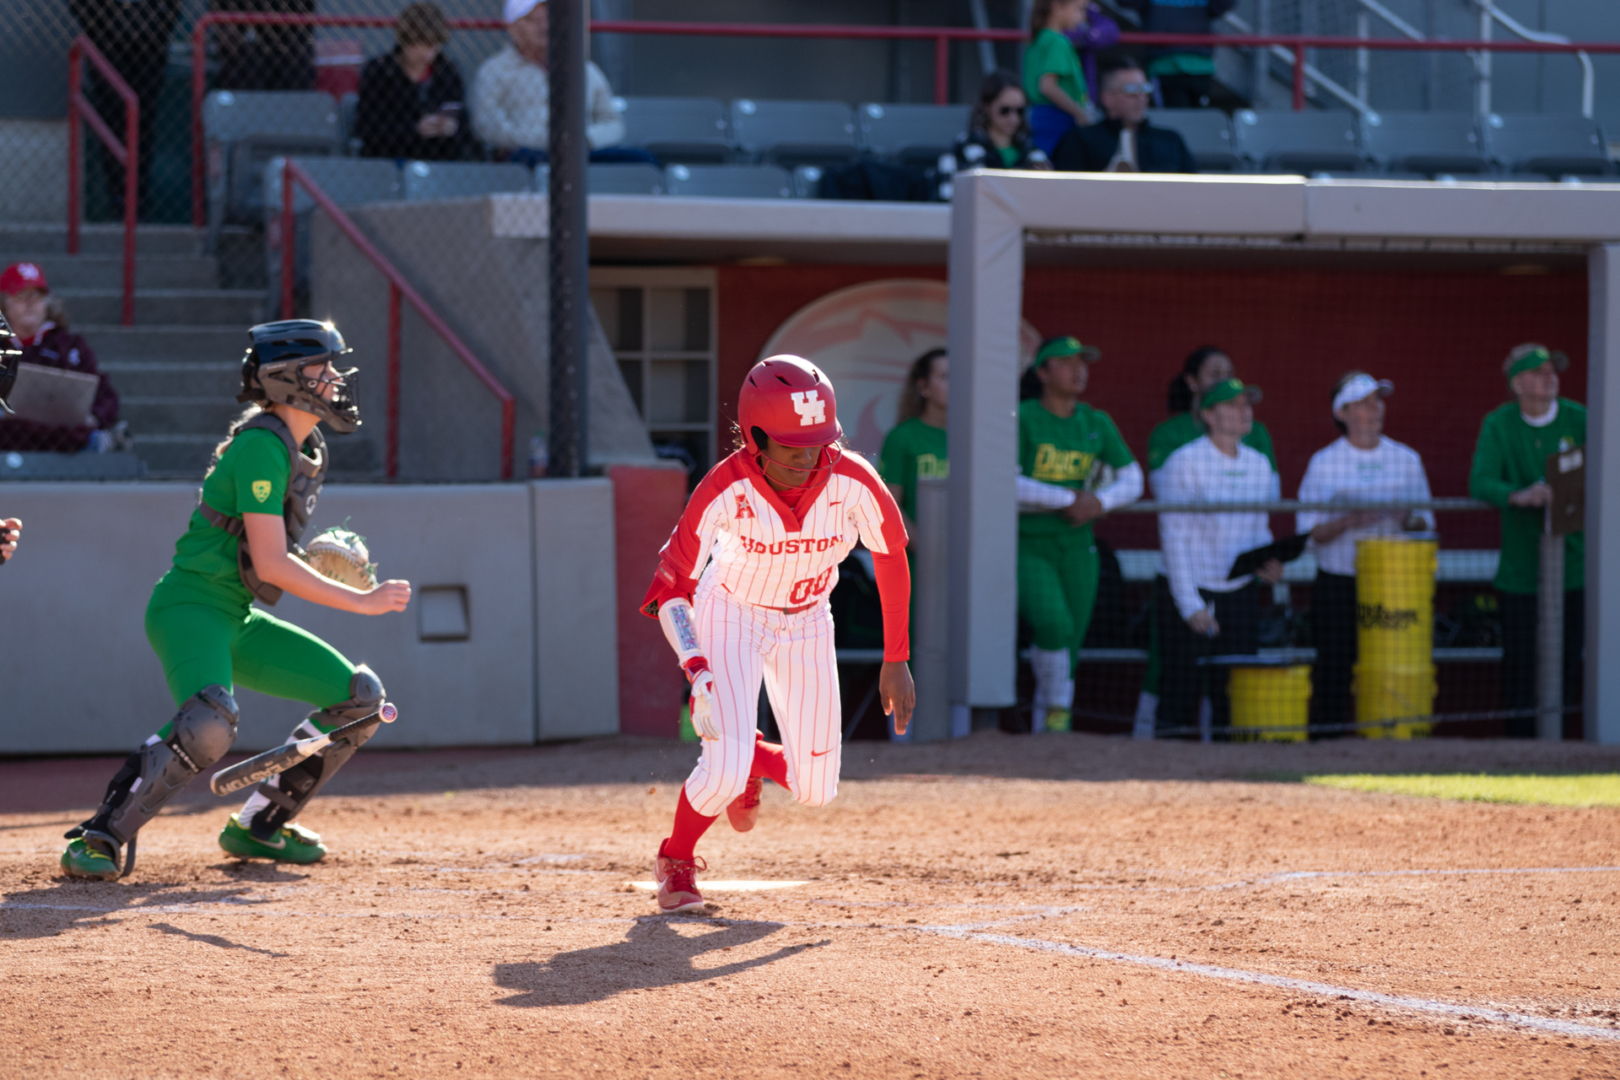 Senior outfielder Lindsey Stewart scored a run in Houston's 9-4 loss to the Ducks in the first contest on Saturday. Kathryn Lenihan/The Cougar